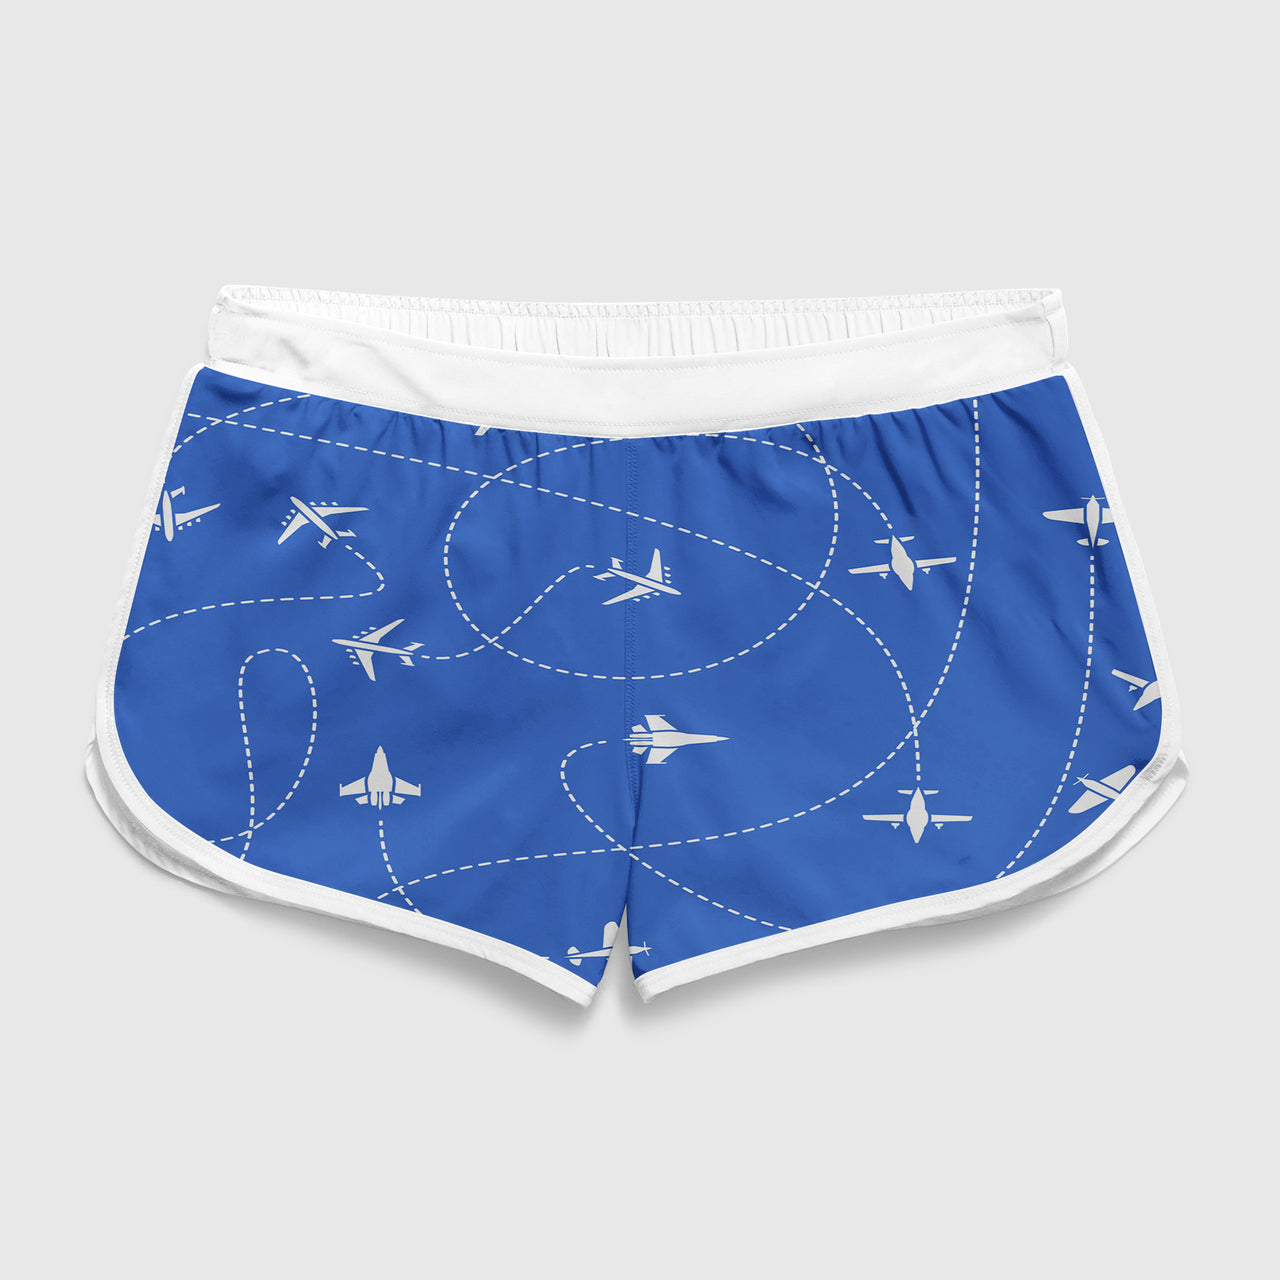 Travel The World By Plane (Blue) Designed Women Beach Style Shorts